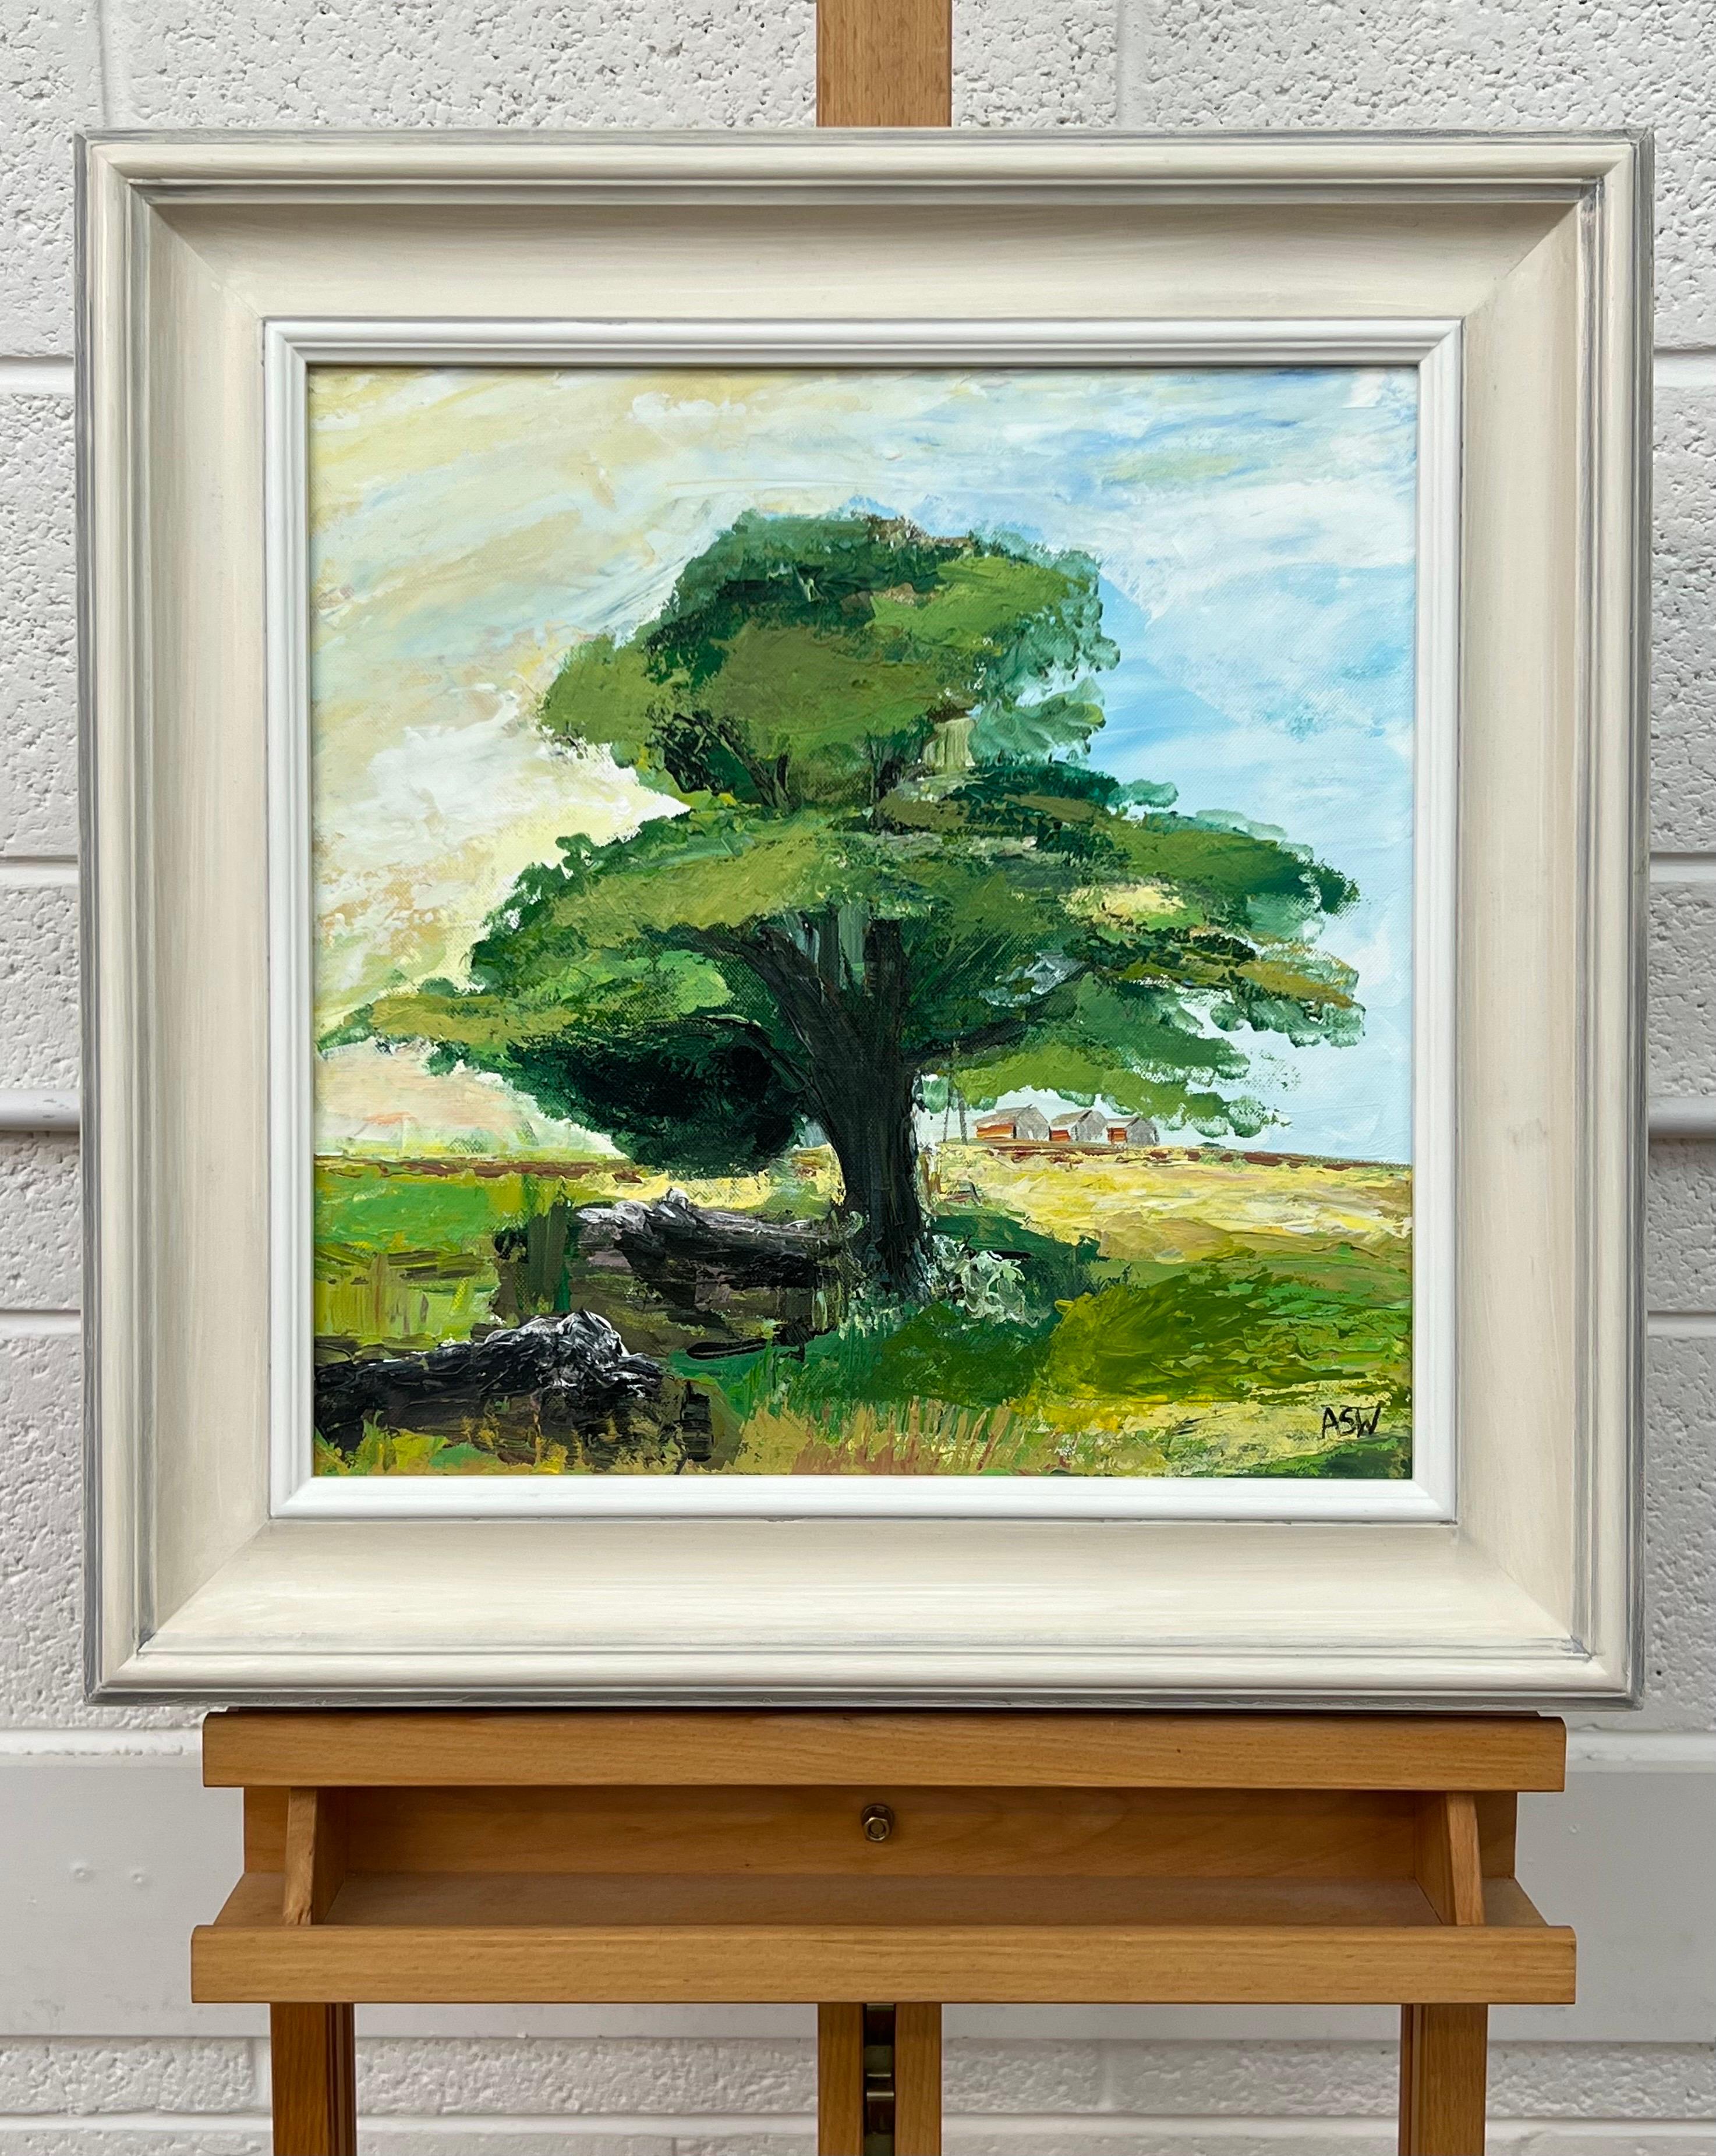 Expressive Impasto Landscape Painting of Oak Tree by Contemporary British Artist For Sale 1